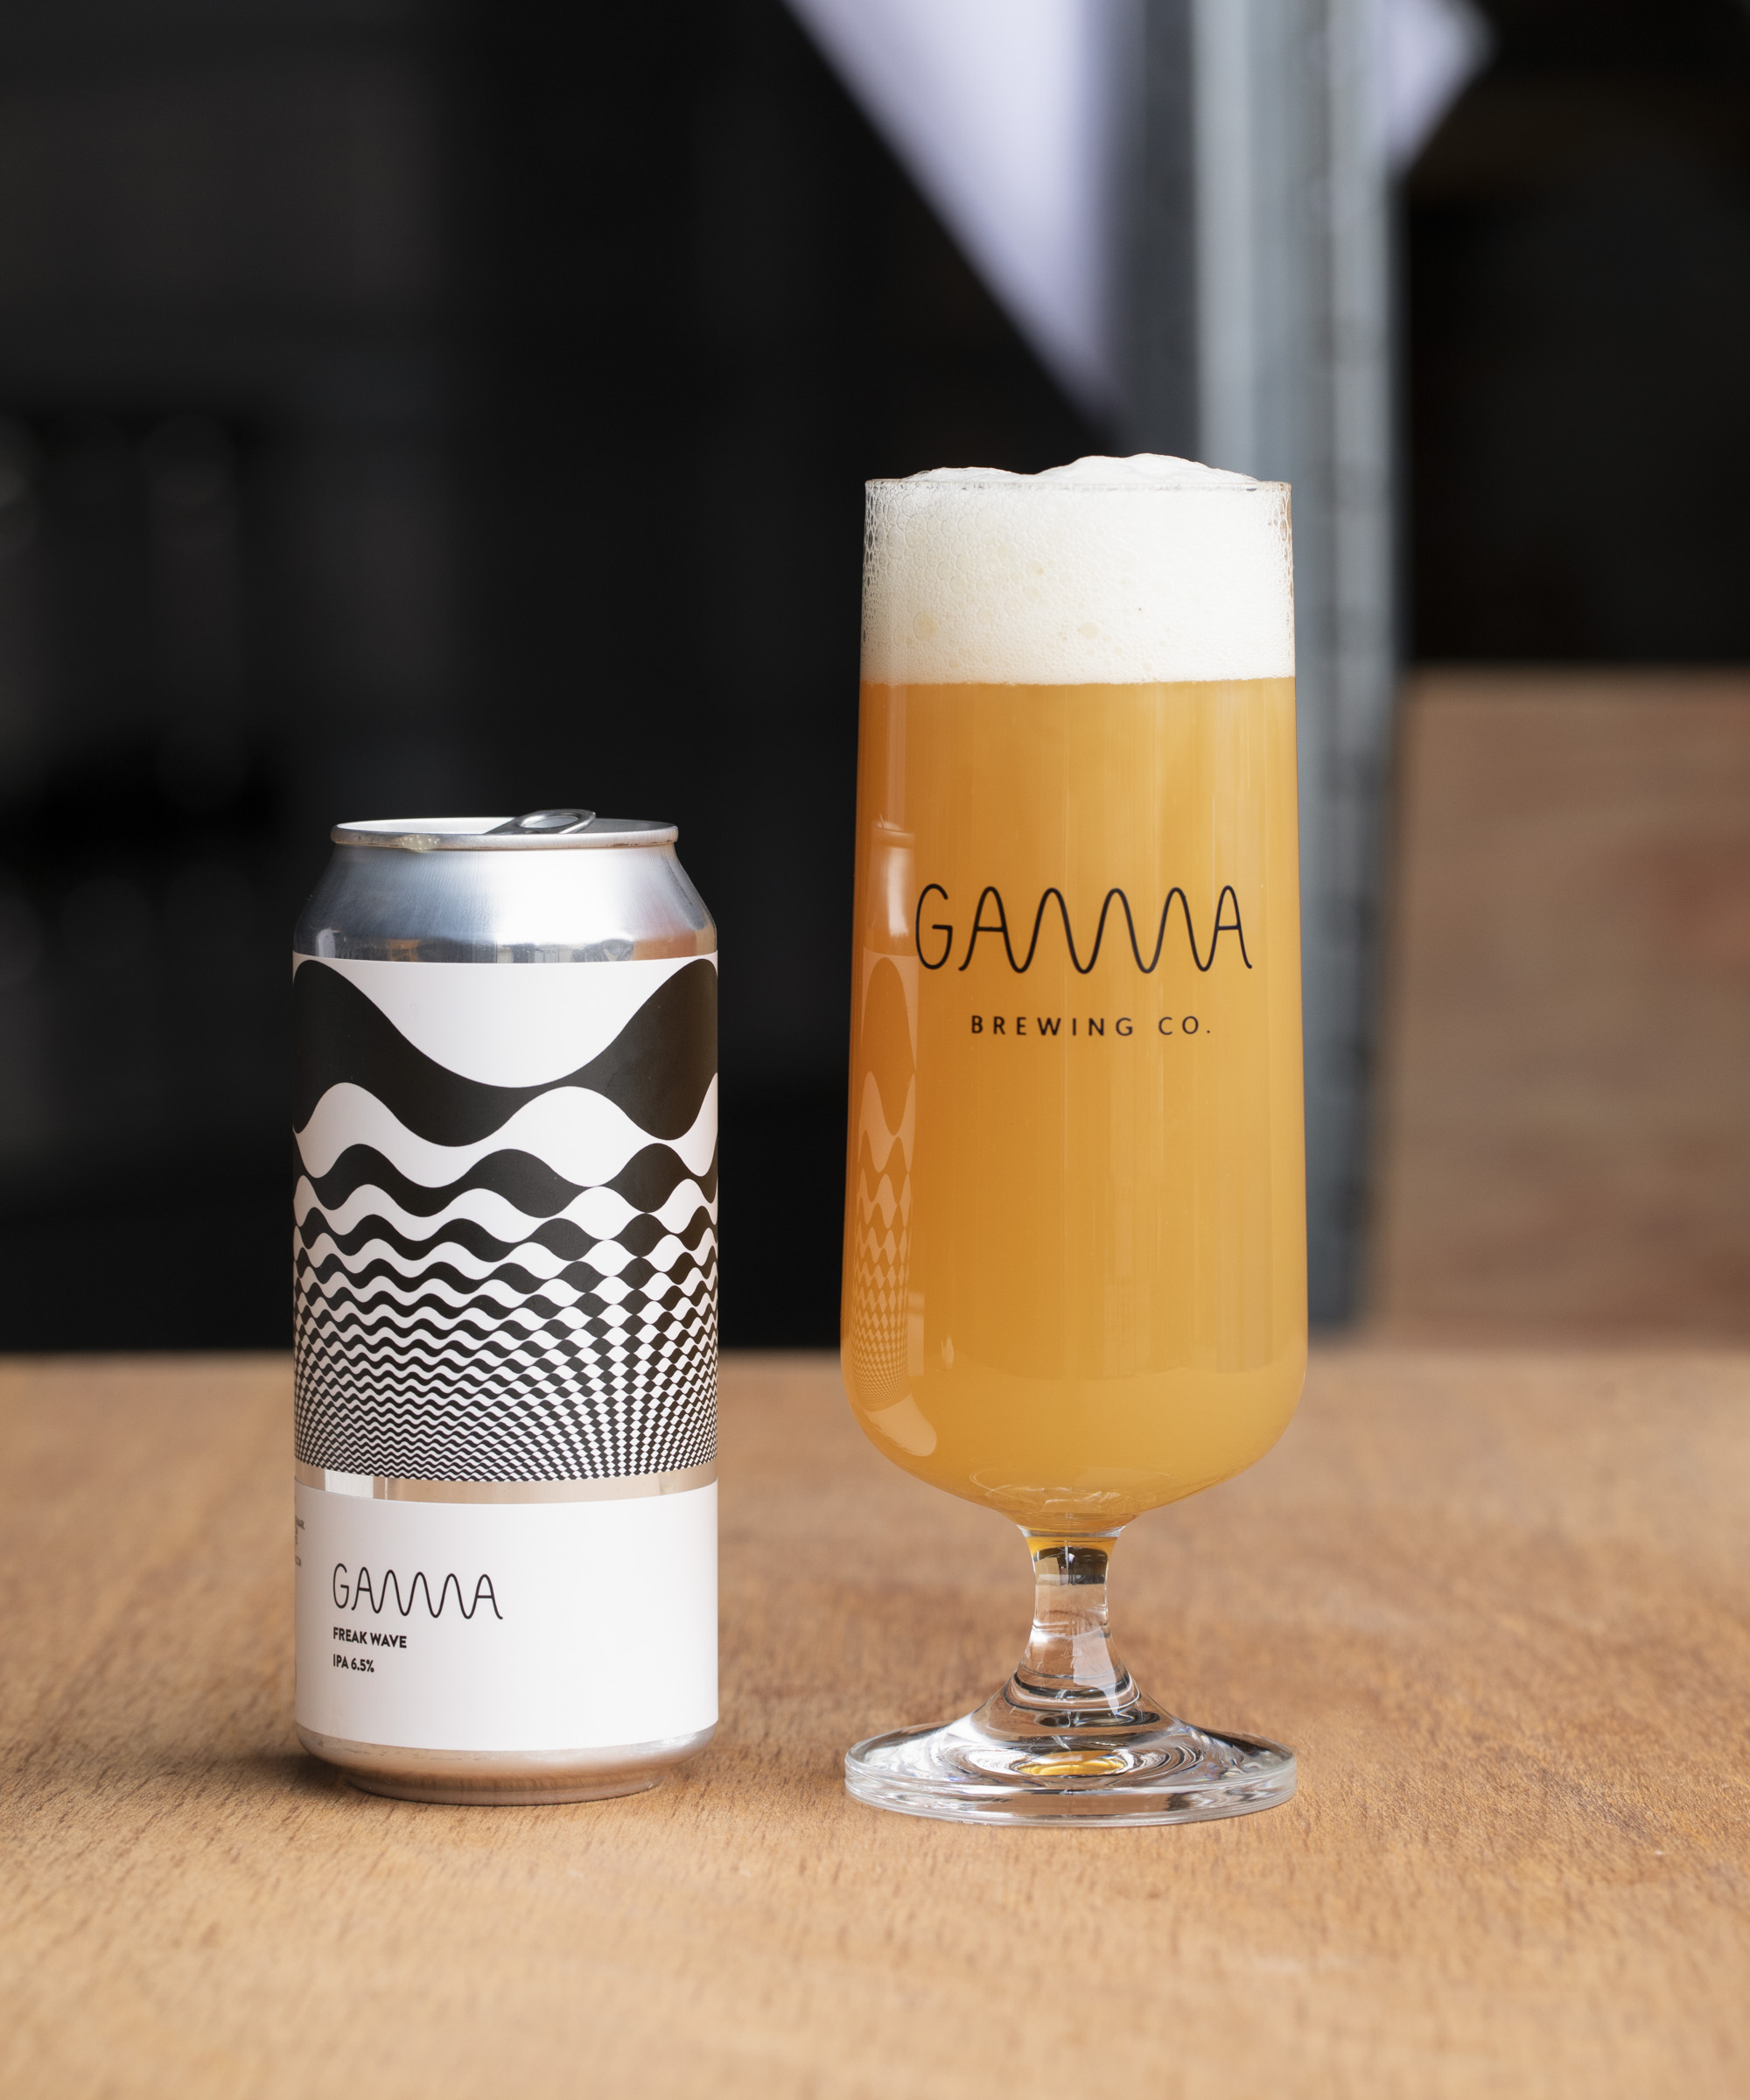 Pick whatever you like at Gamma Brewing Co. in Herlev and Aarhus – Take a walk around the tanks, have a tasting flight, and grab cans to go from this hyped hop-forward brewery